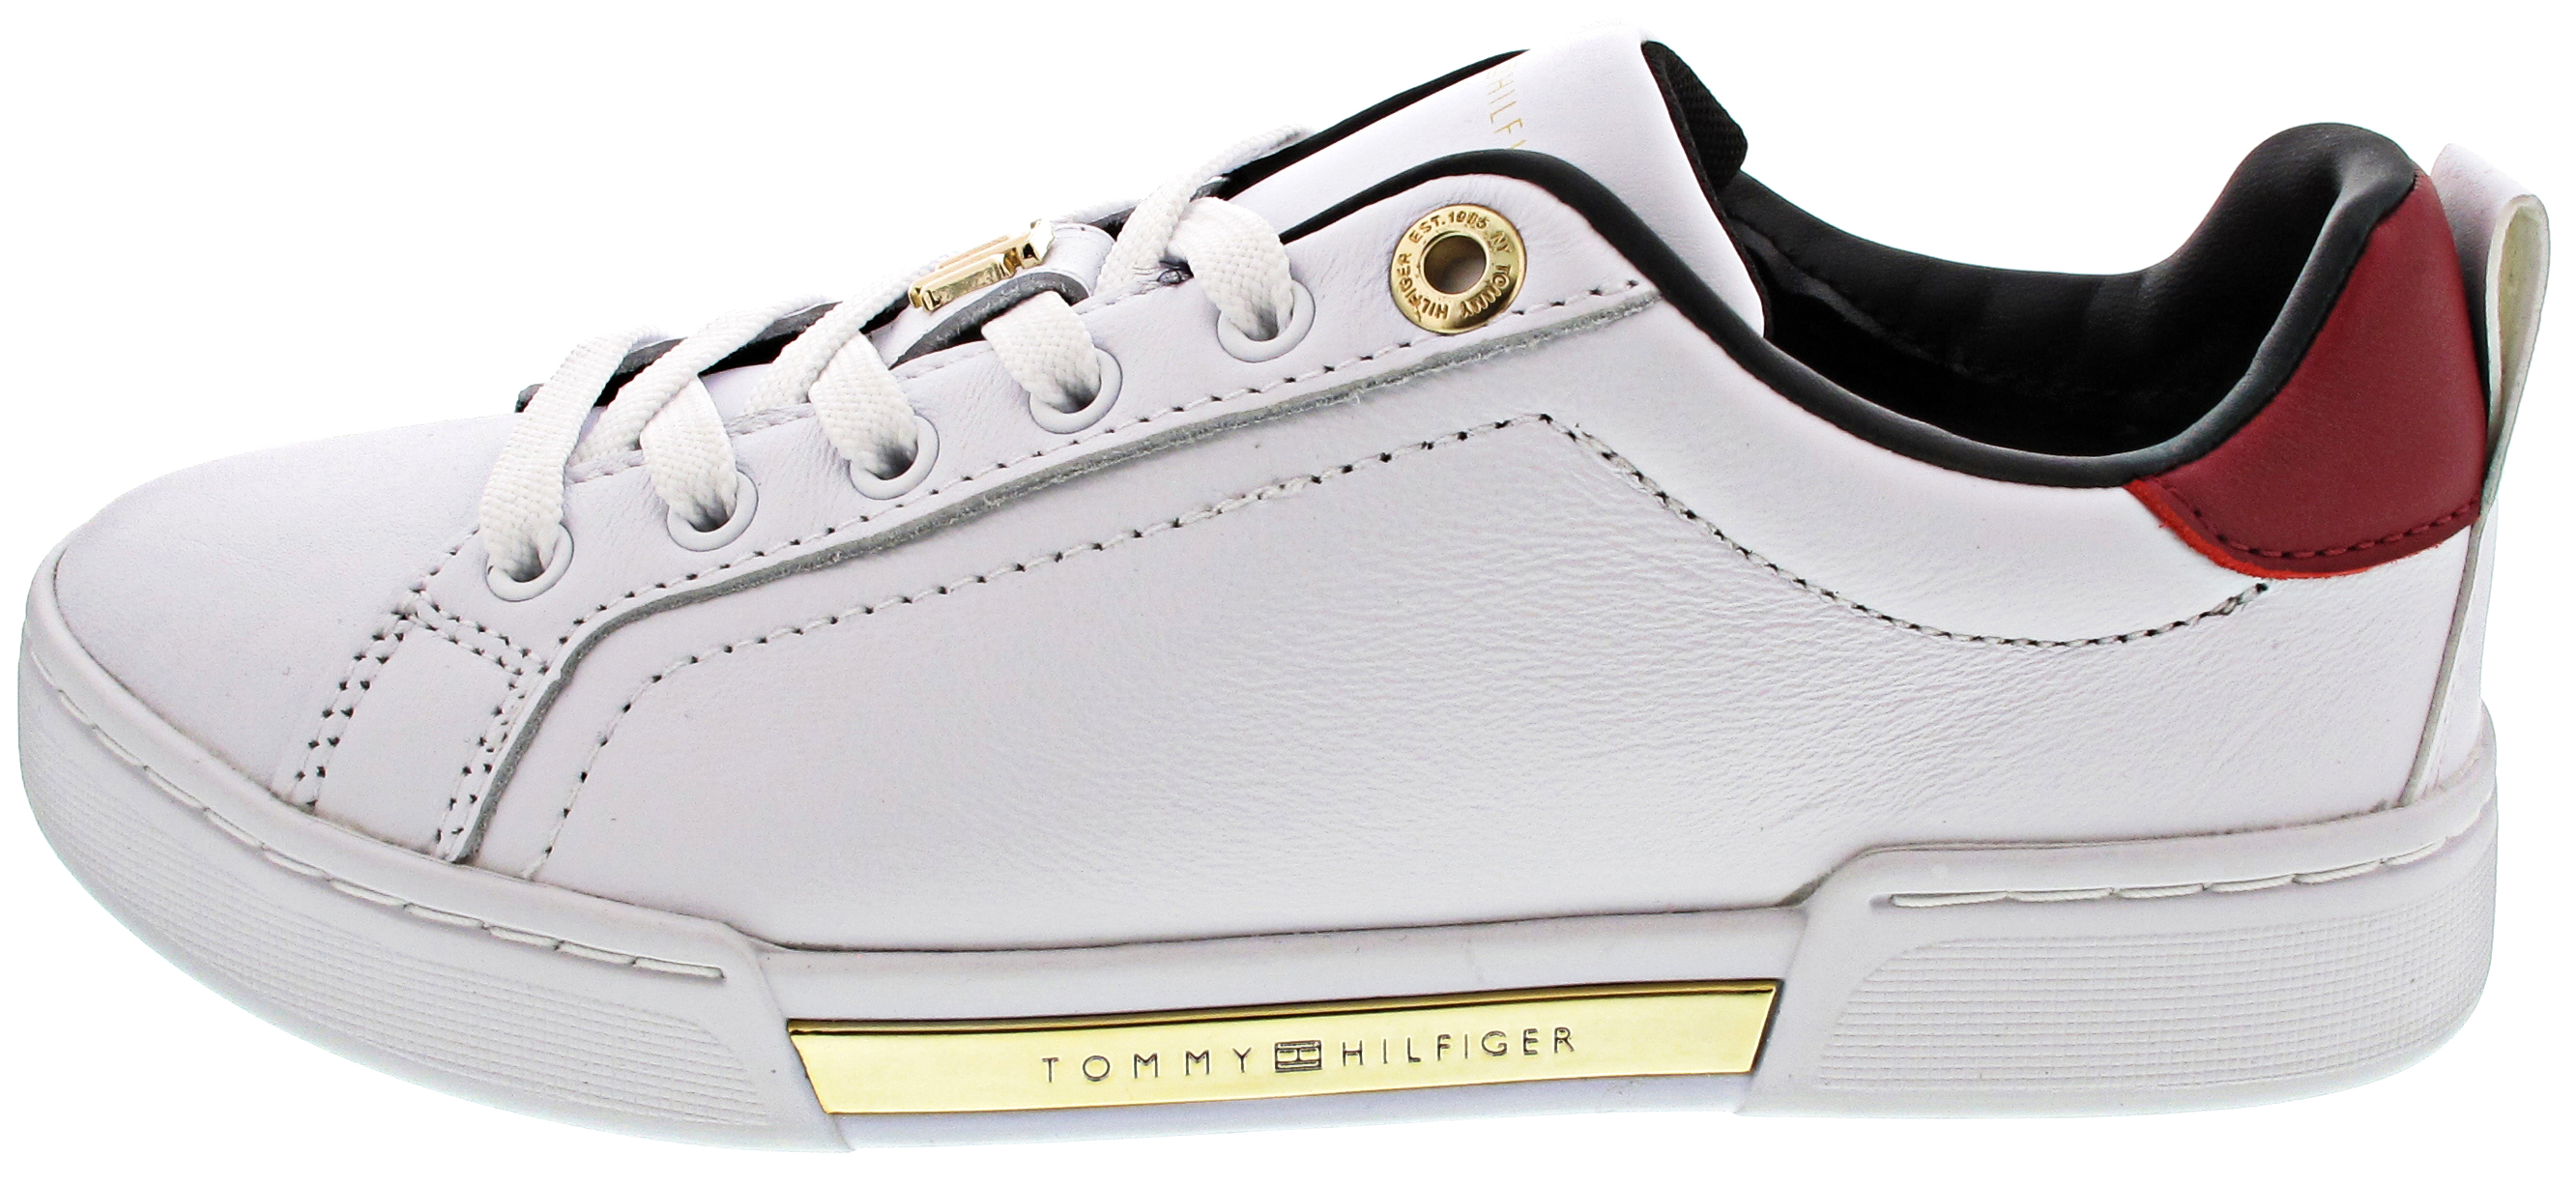 Tommy Hilfiger TH Hardware Elevated Snea